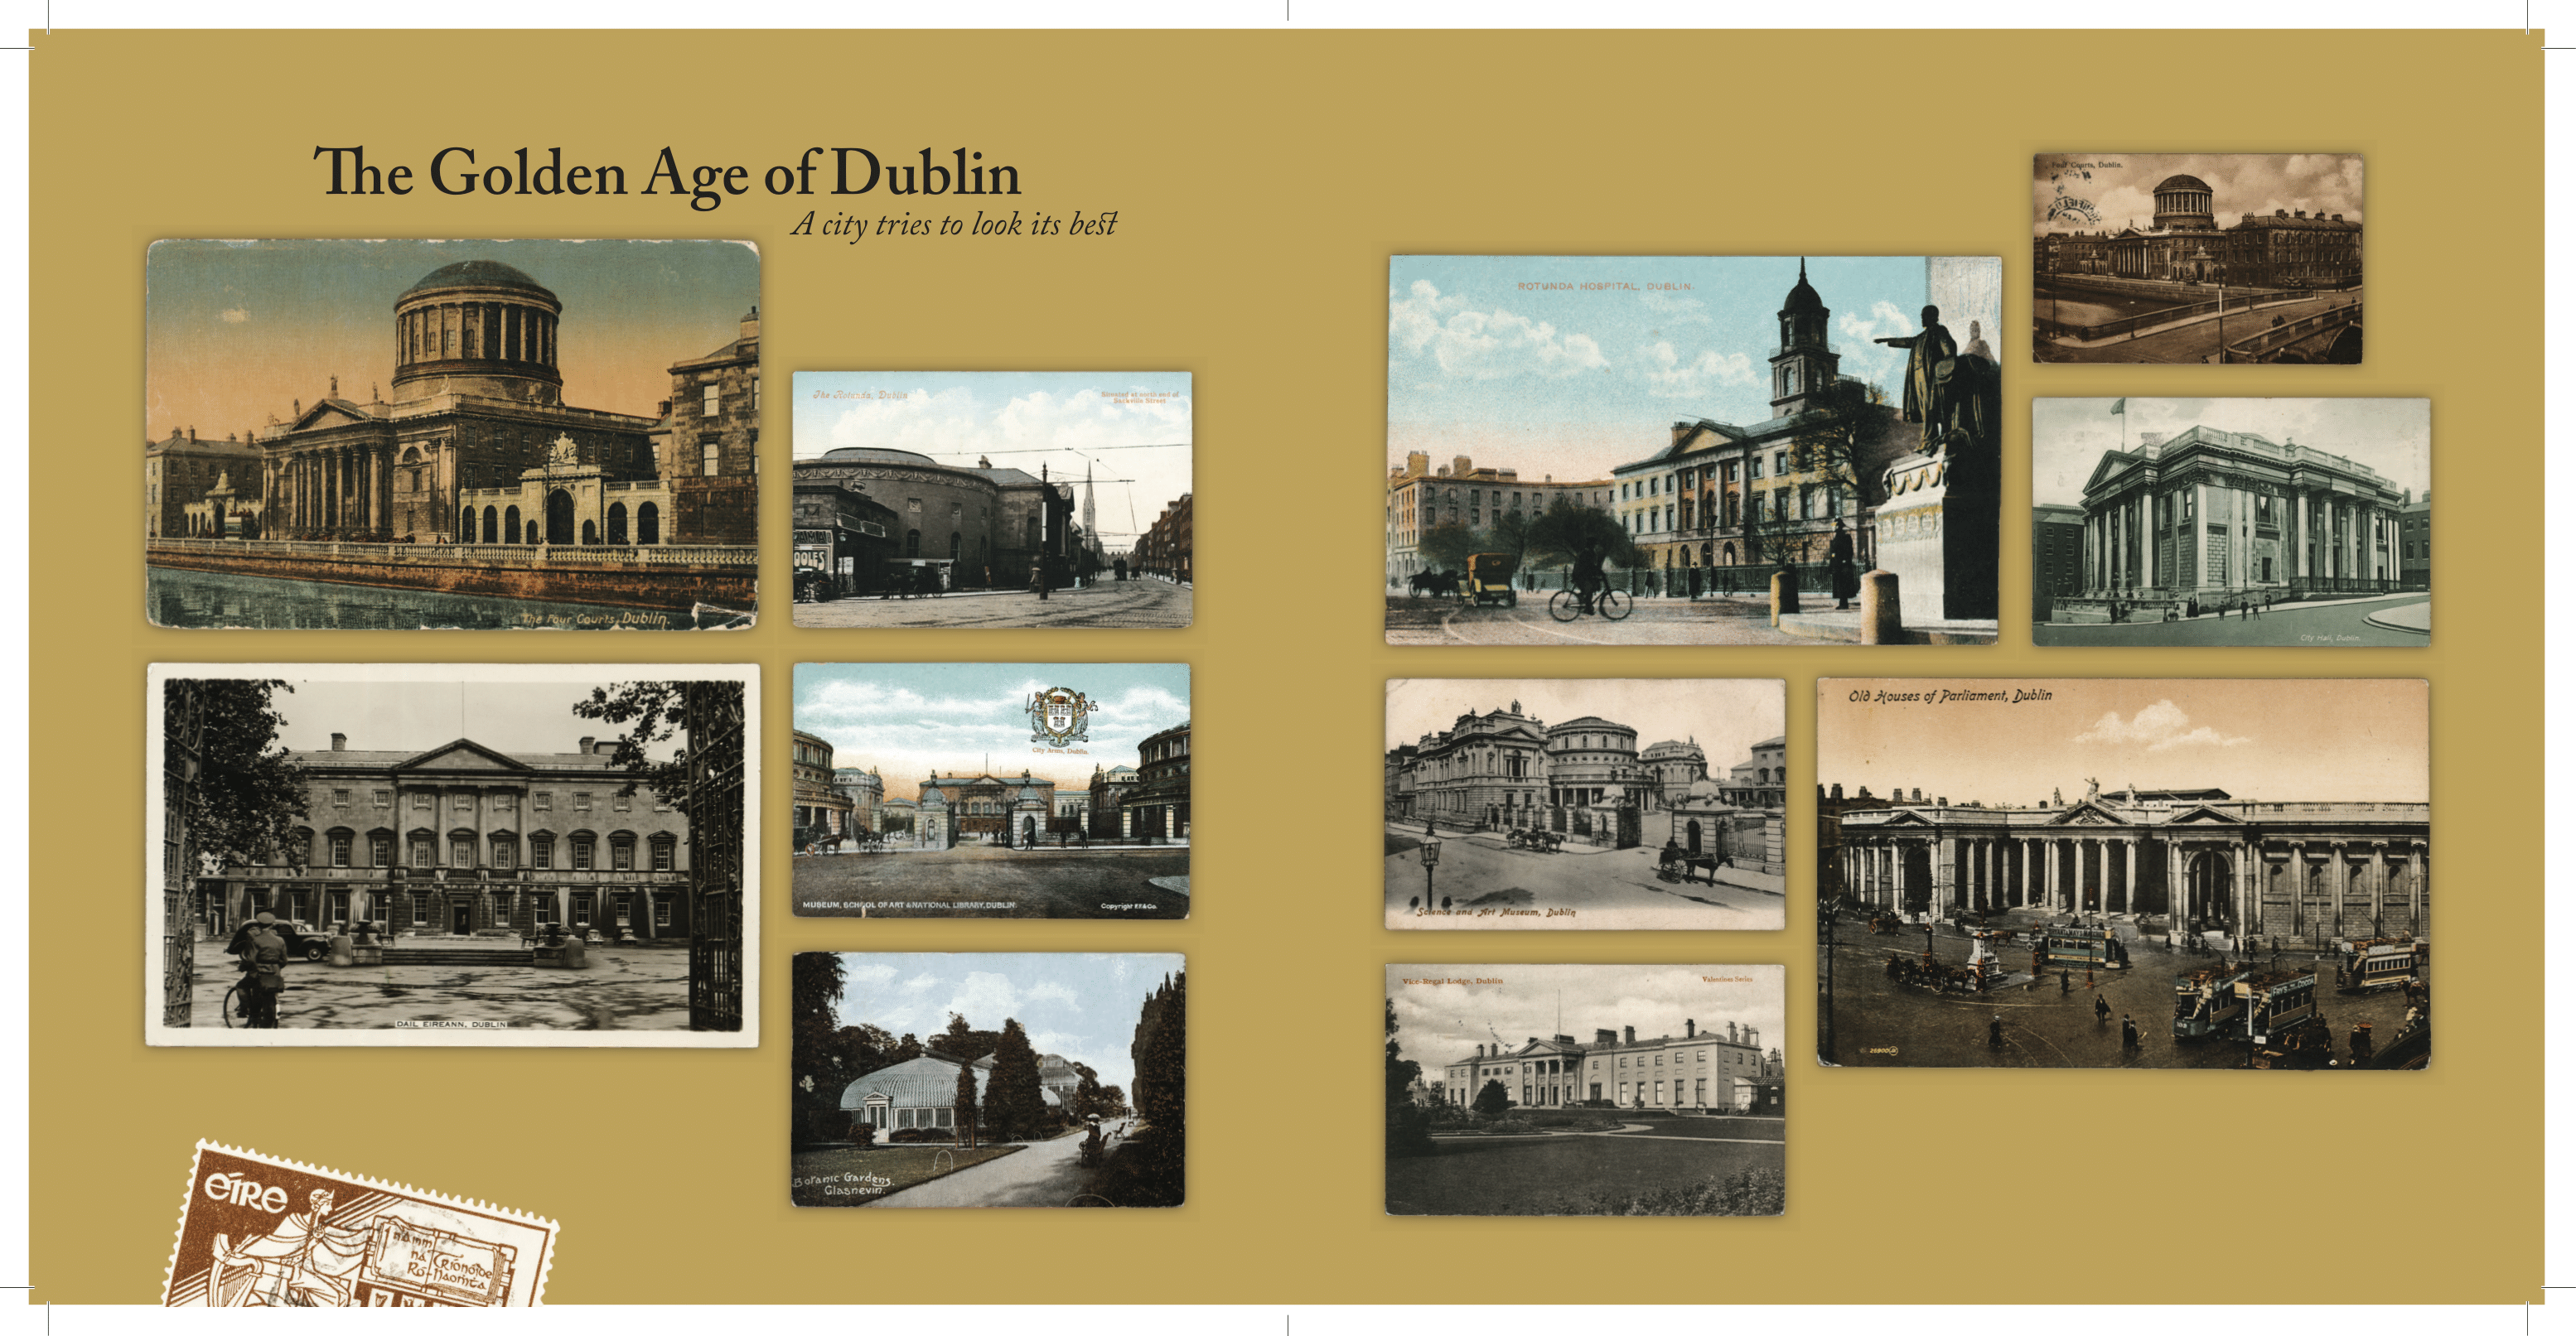 EDITSPostcard-History-of-Dublin-FV-for-print-96-pages-copy-dragged-2-1